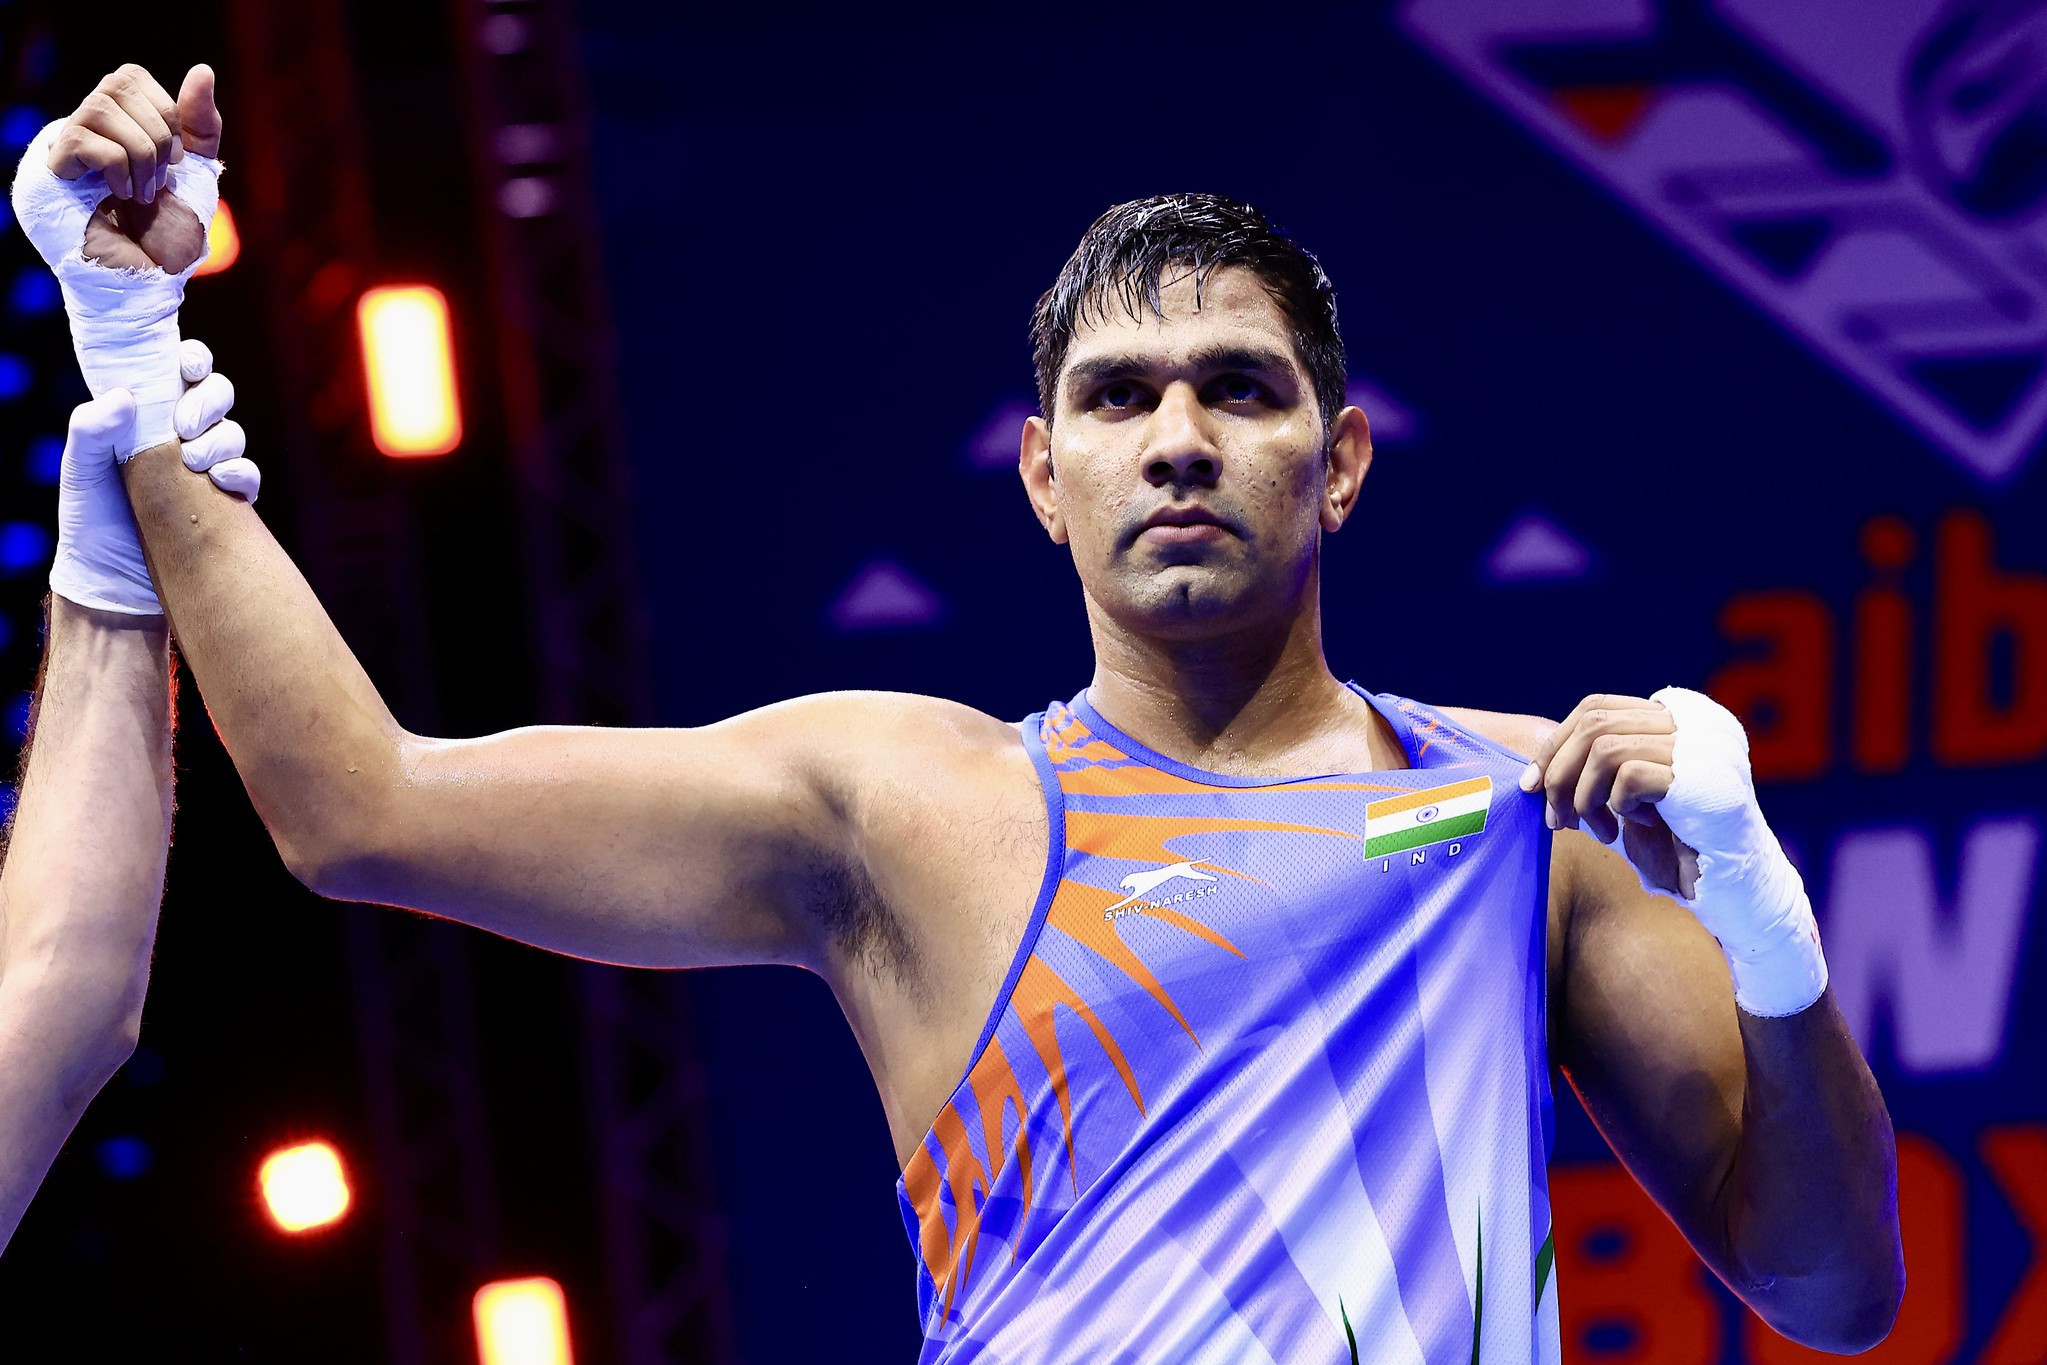 India's Narender put in another dominant effort in the over-92kg with a victory over Mohamed Kendeh of Sierra Leone ©AIBA